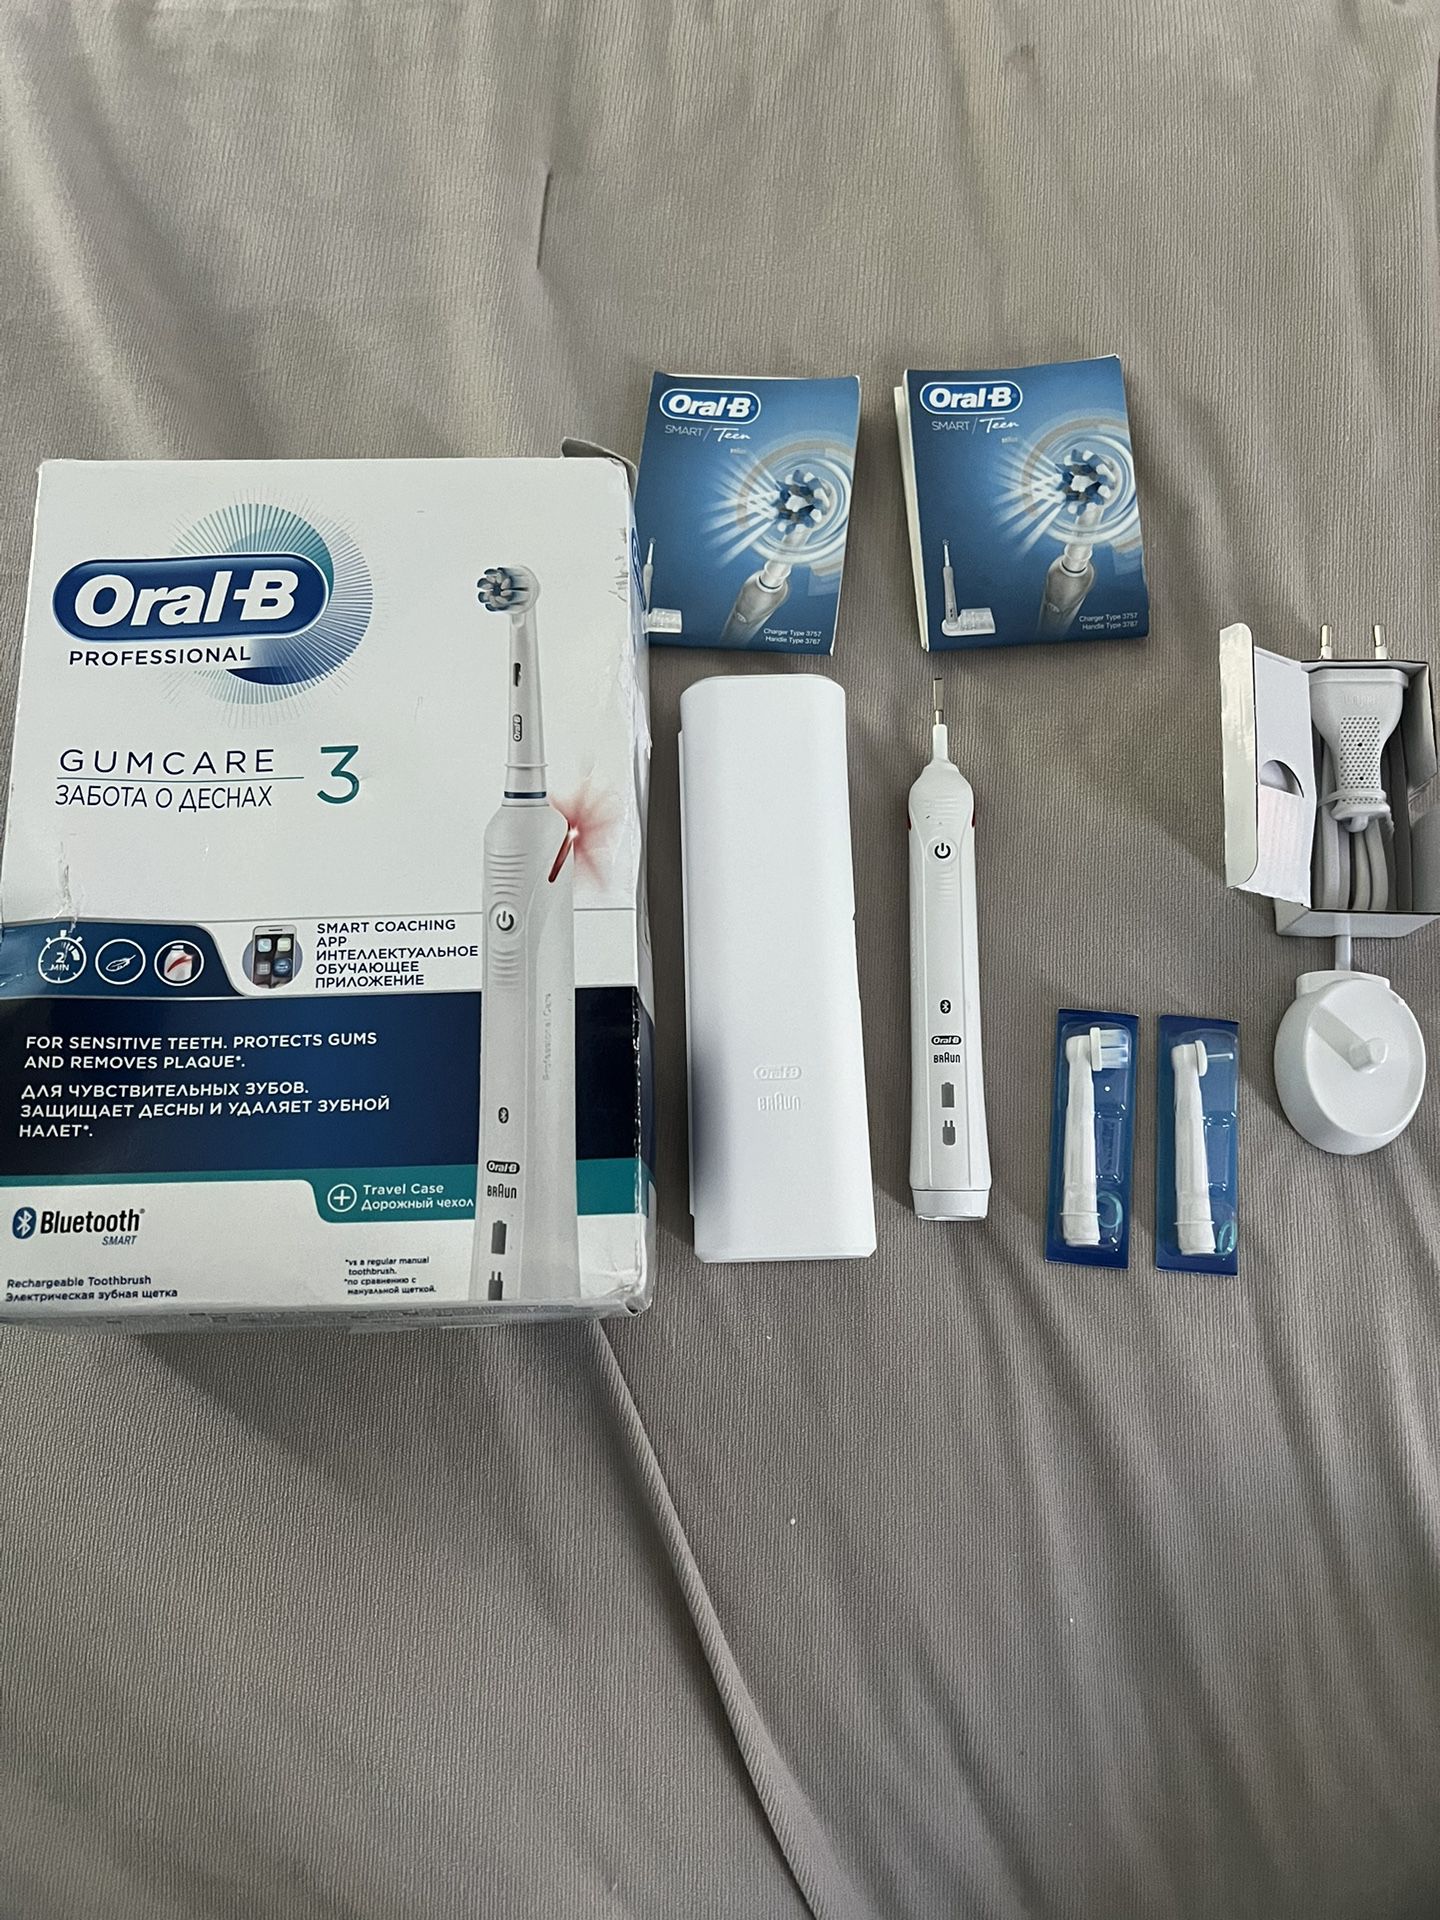 Oral-B Professional Toothbrush, Electric